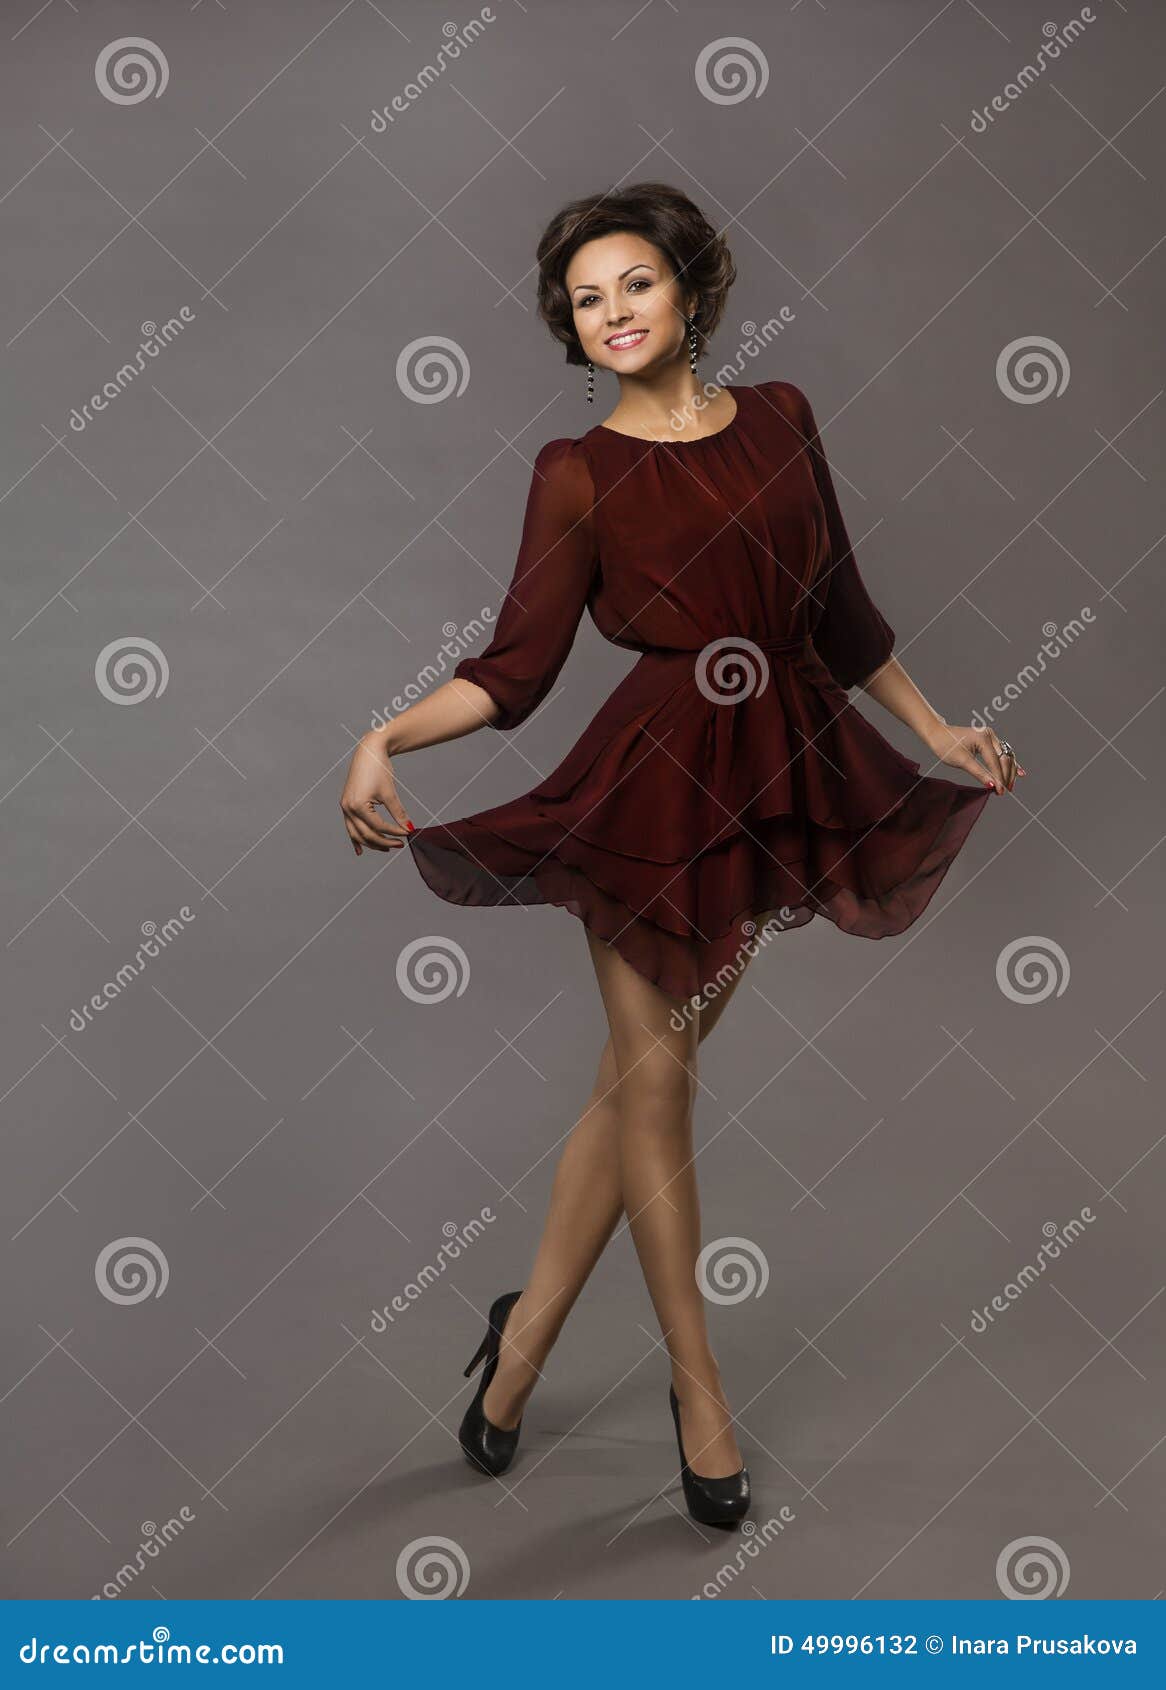 woman happy dancing, smiling glad girl posing in red dress